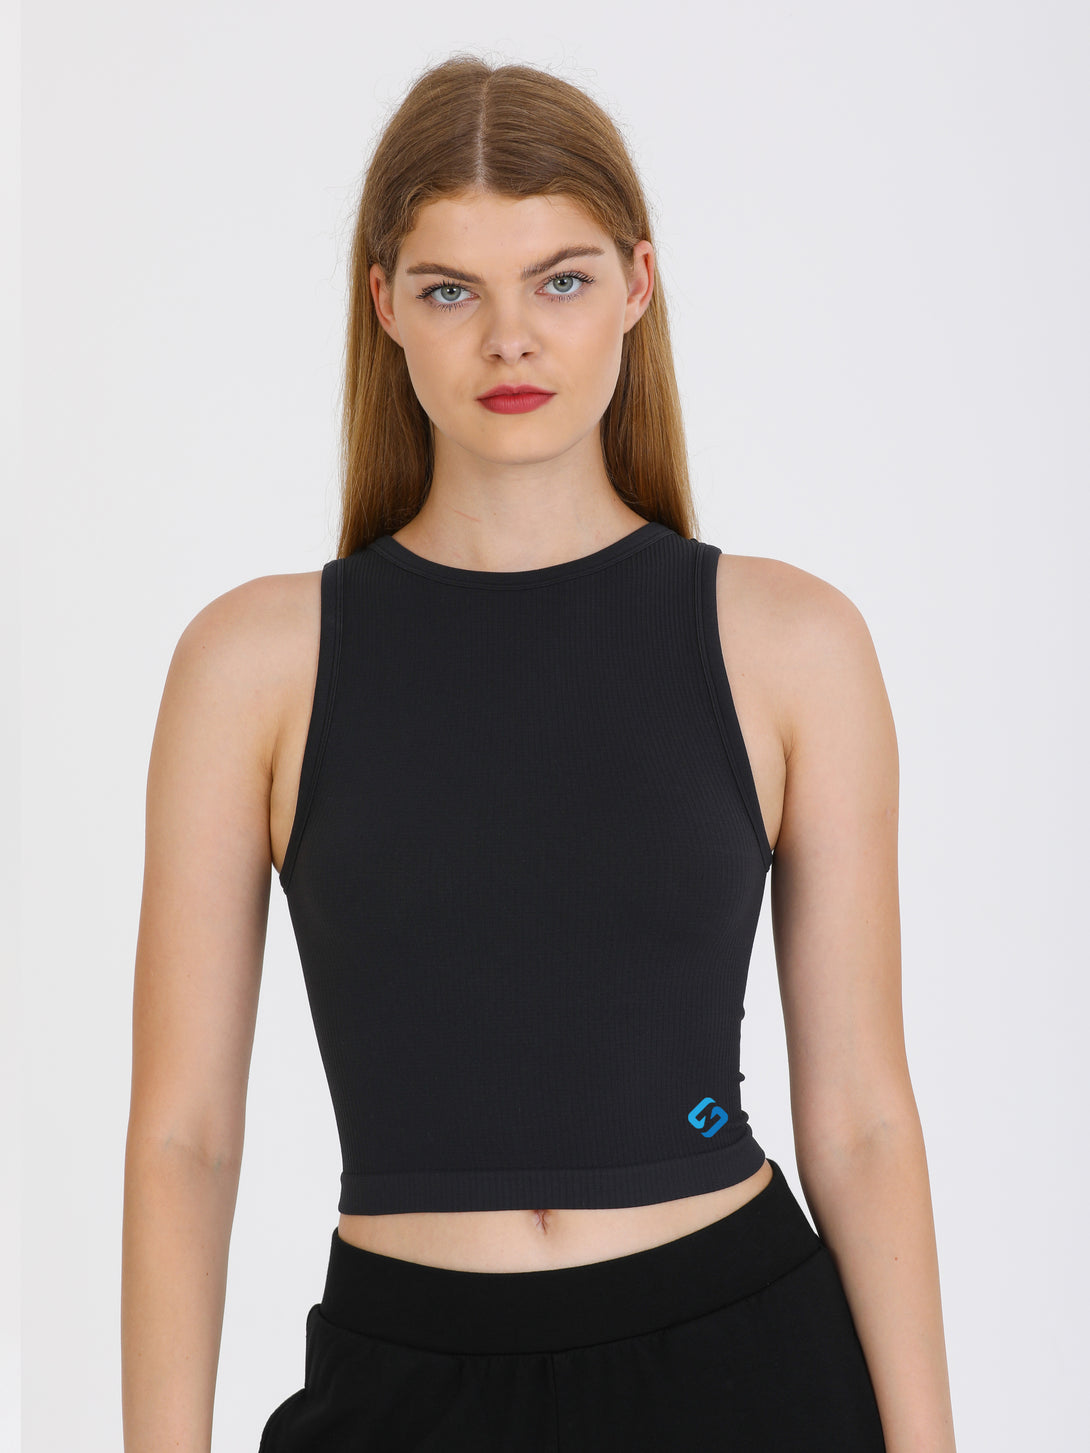 A Woman Wearing Black Color All-Day Sleeveless Strapped Crop Top